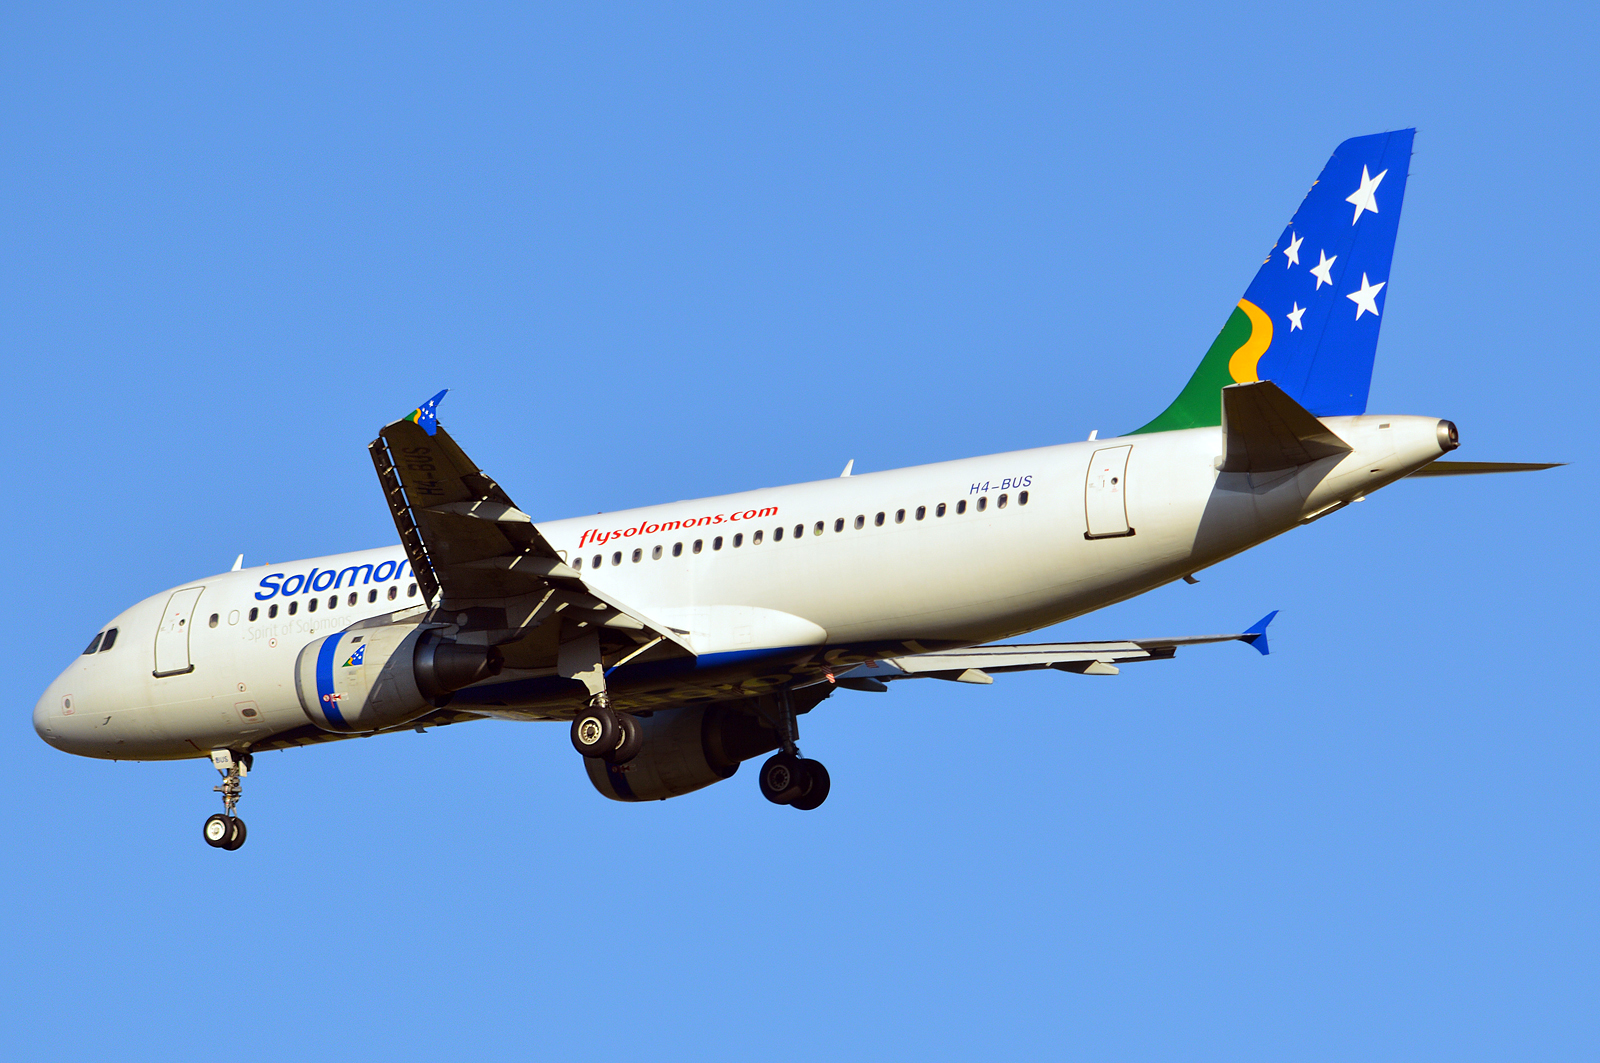 A Solomon Airlines A320 approaching to land.